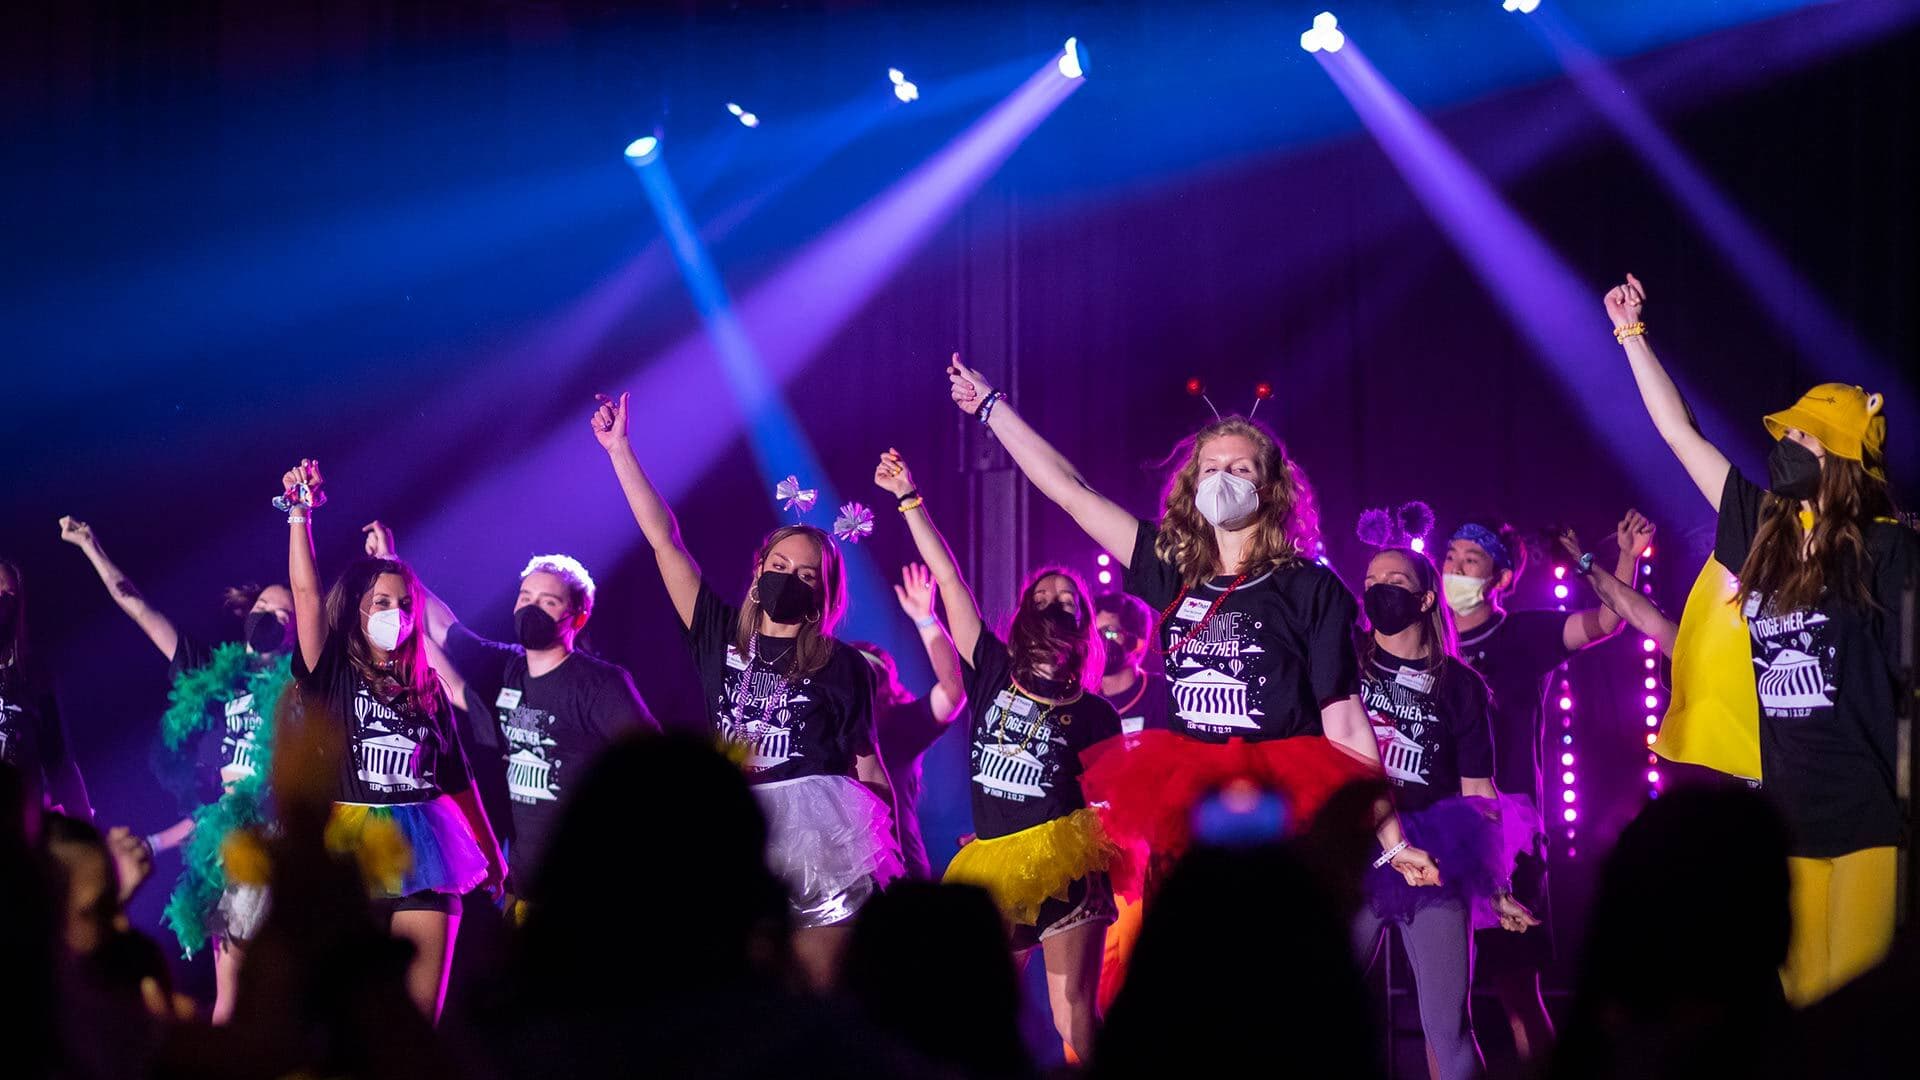 dancers in tutus and event t-shirts on stage vigorously dancing